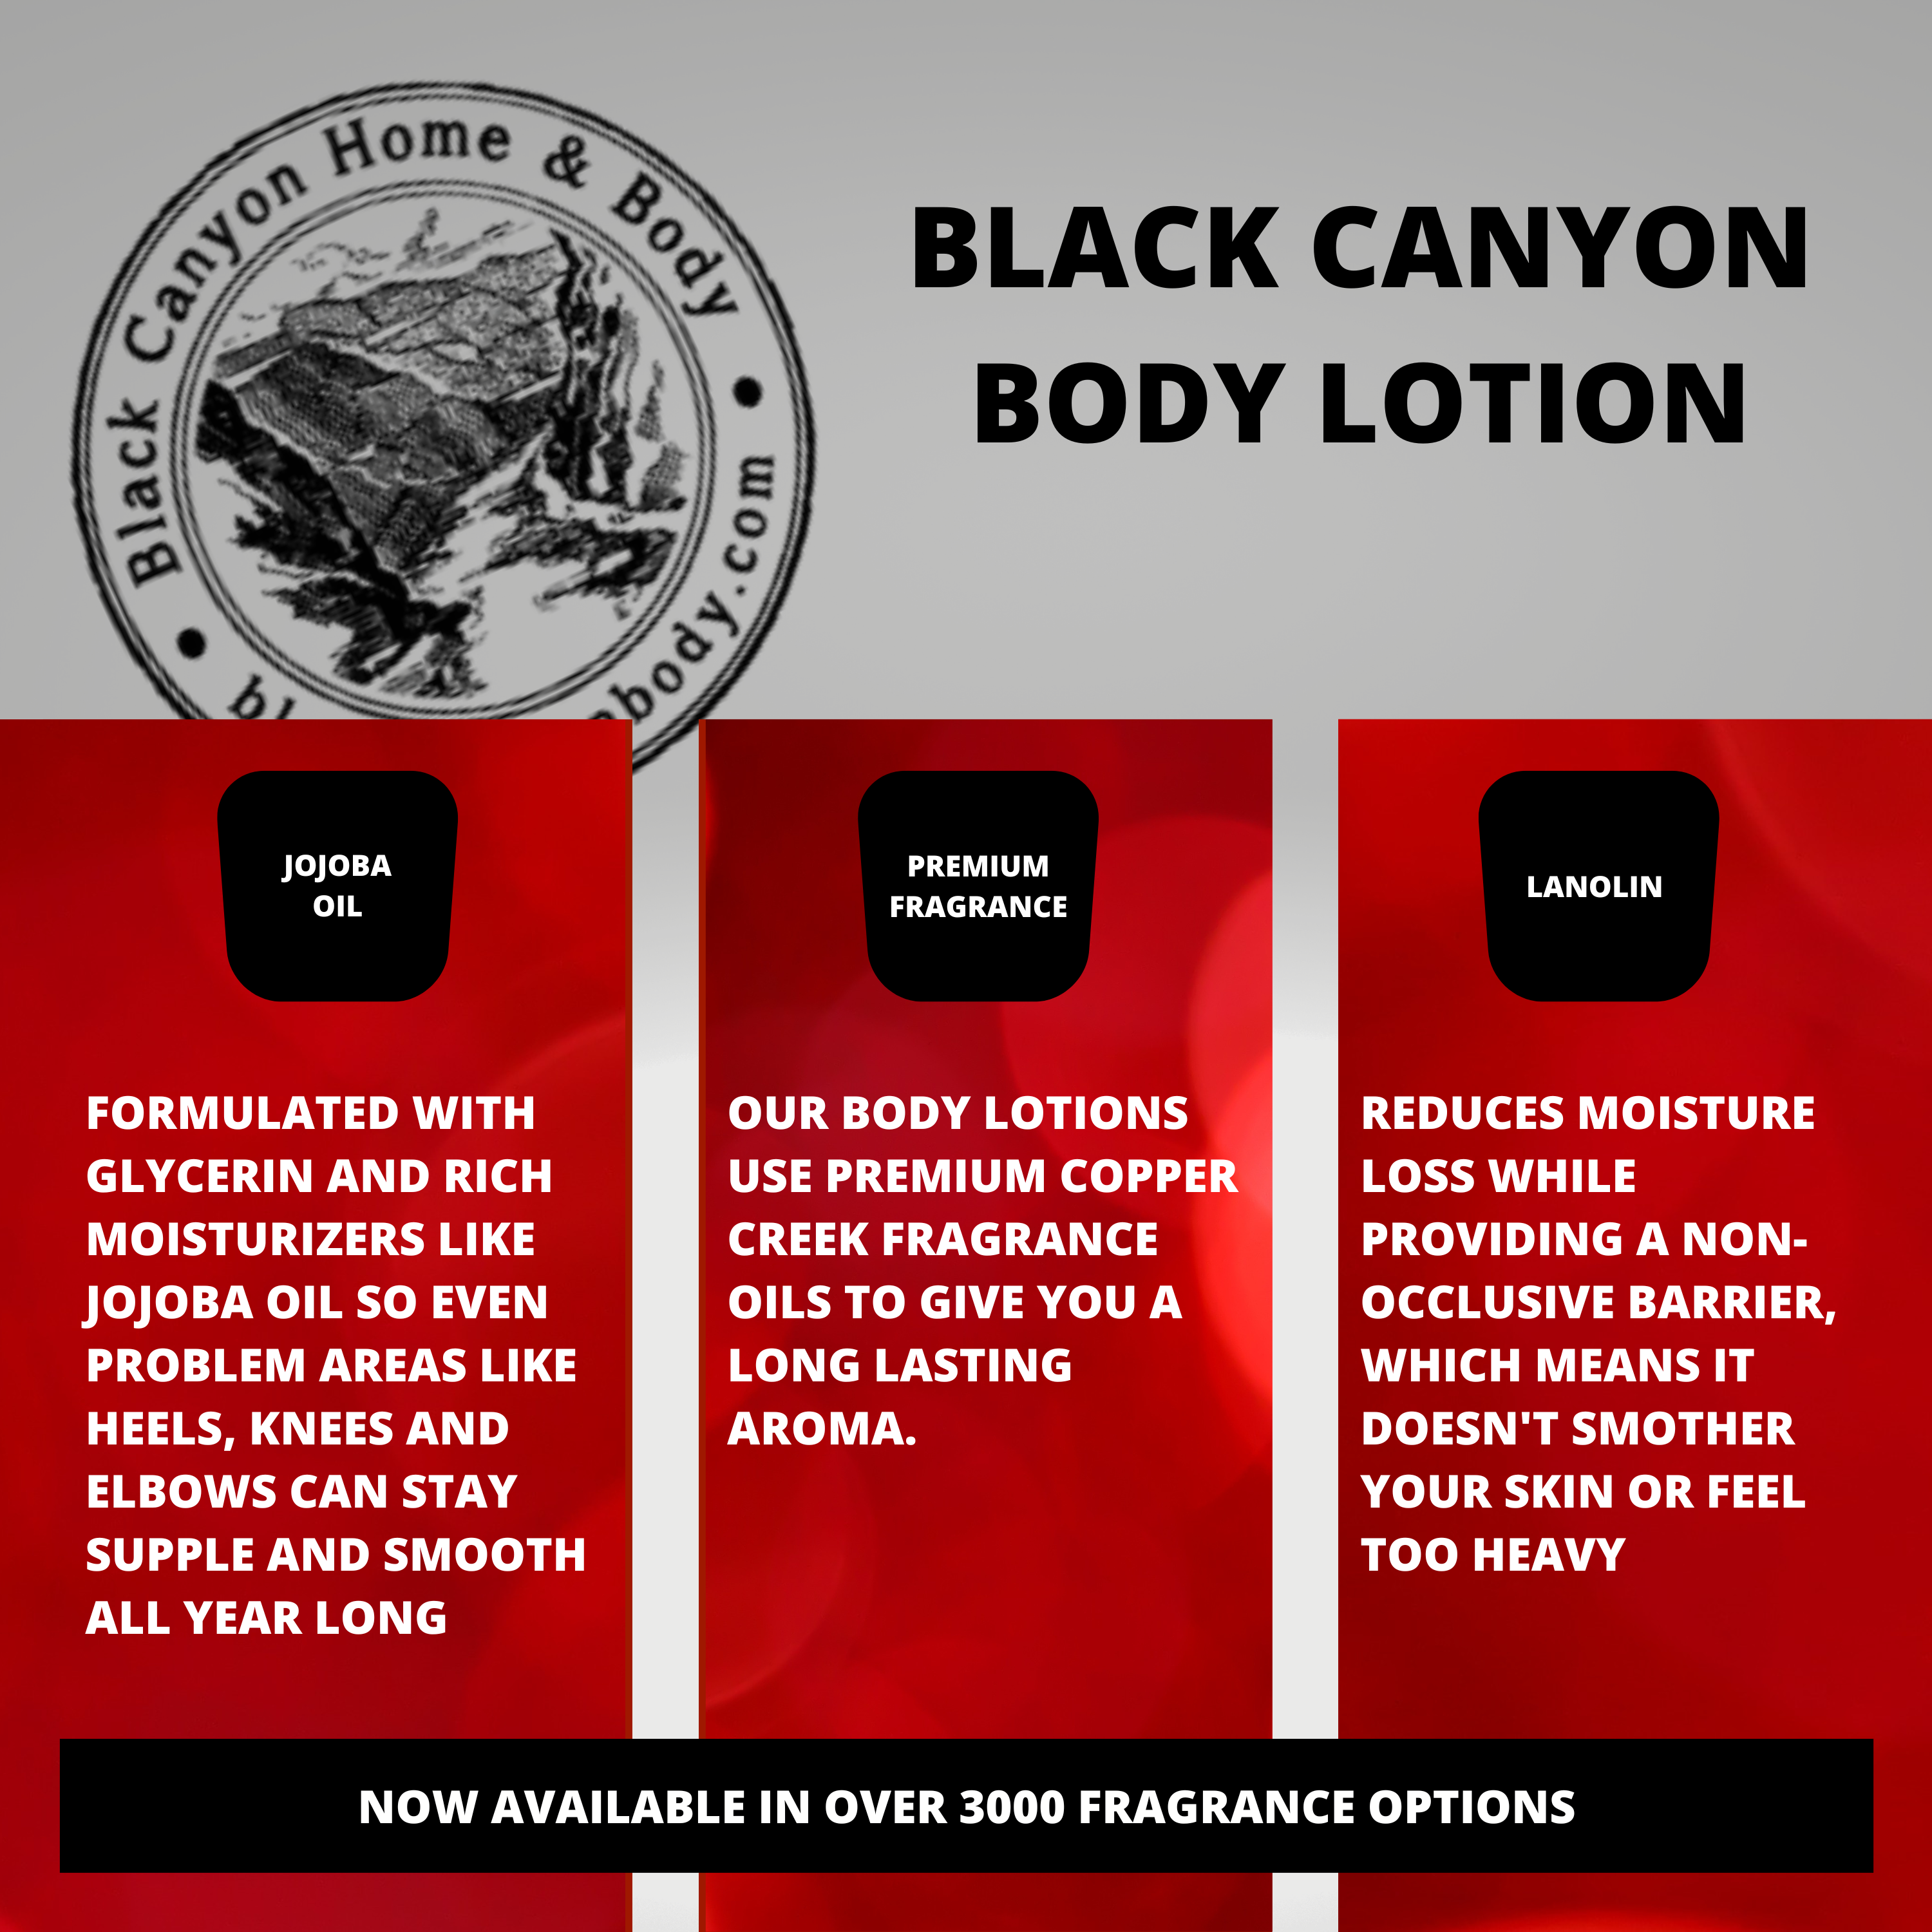 Black Canyon Cranberry Christmas Scented Luxury Body Lotion with Lanolin and Jojoba Oil